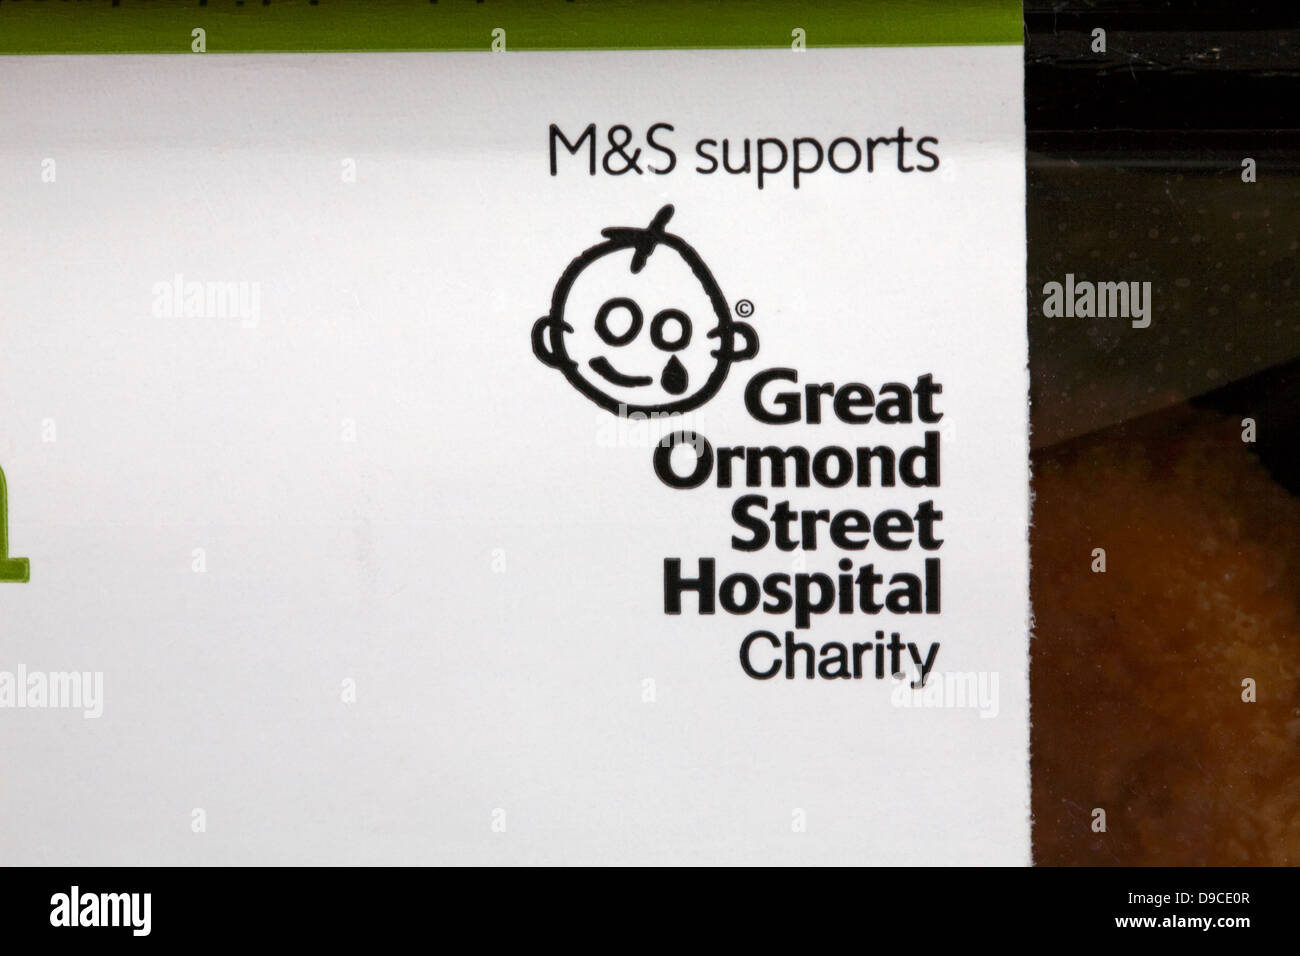 M&S supports Great Ormond Street Hospital Charity details on food packaging Stock Photo